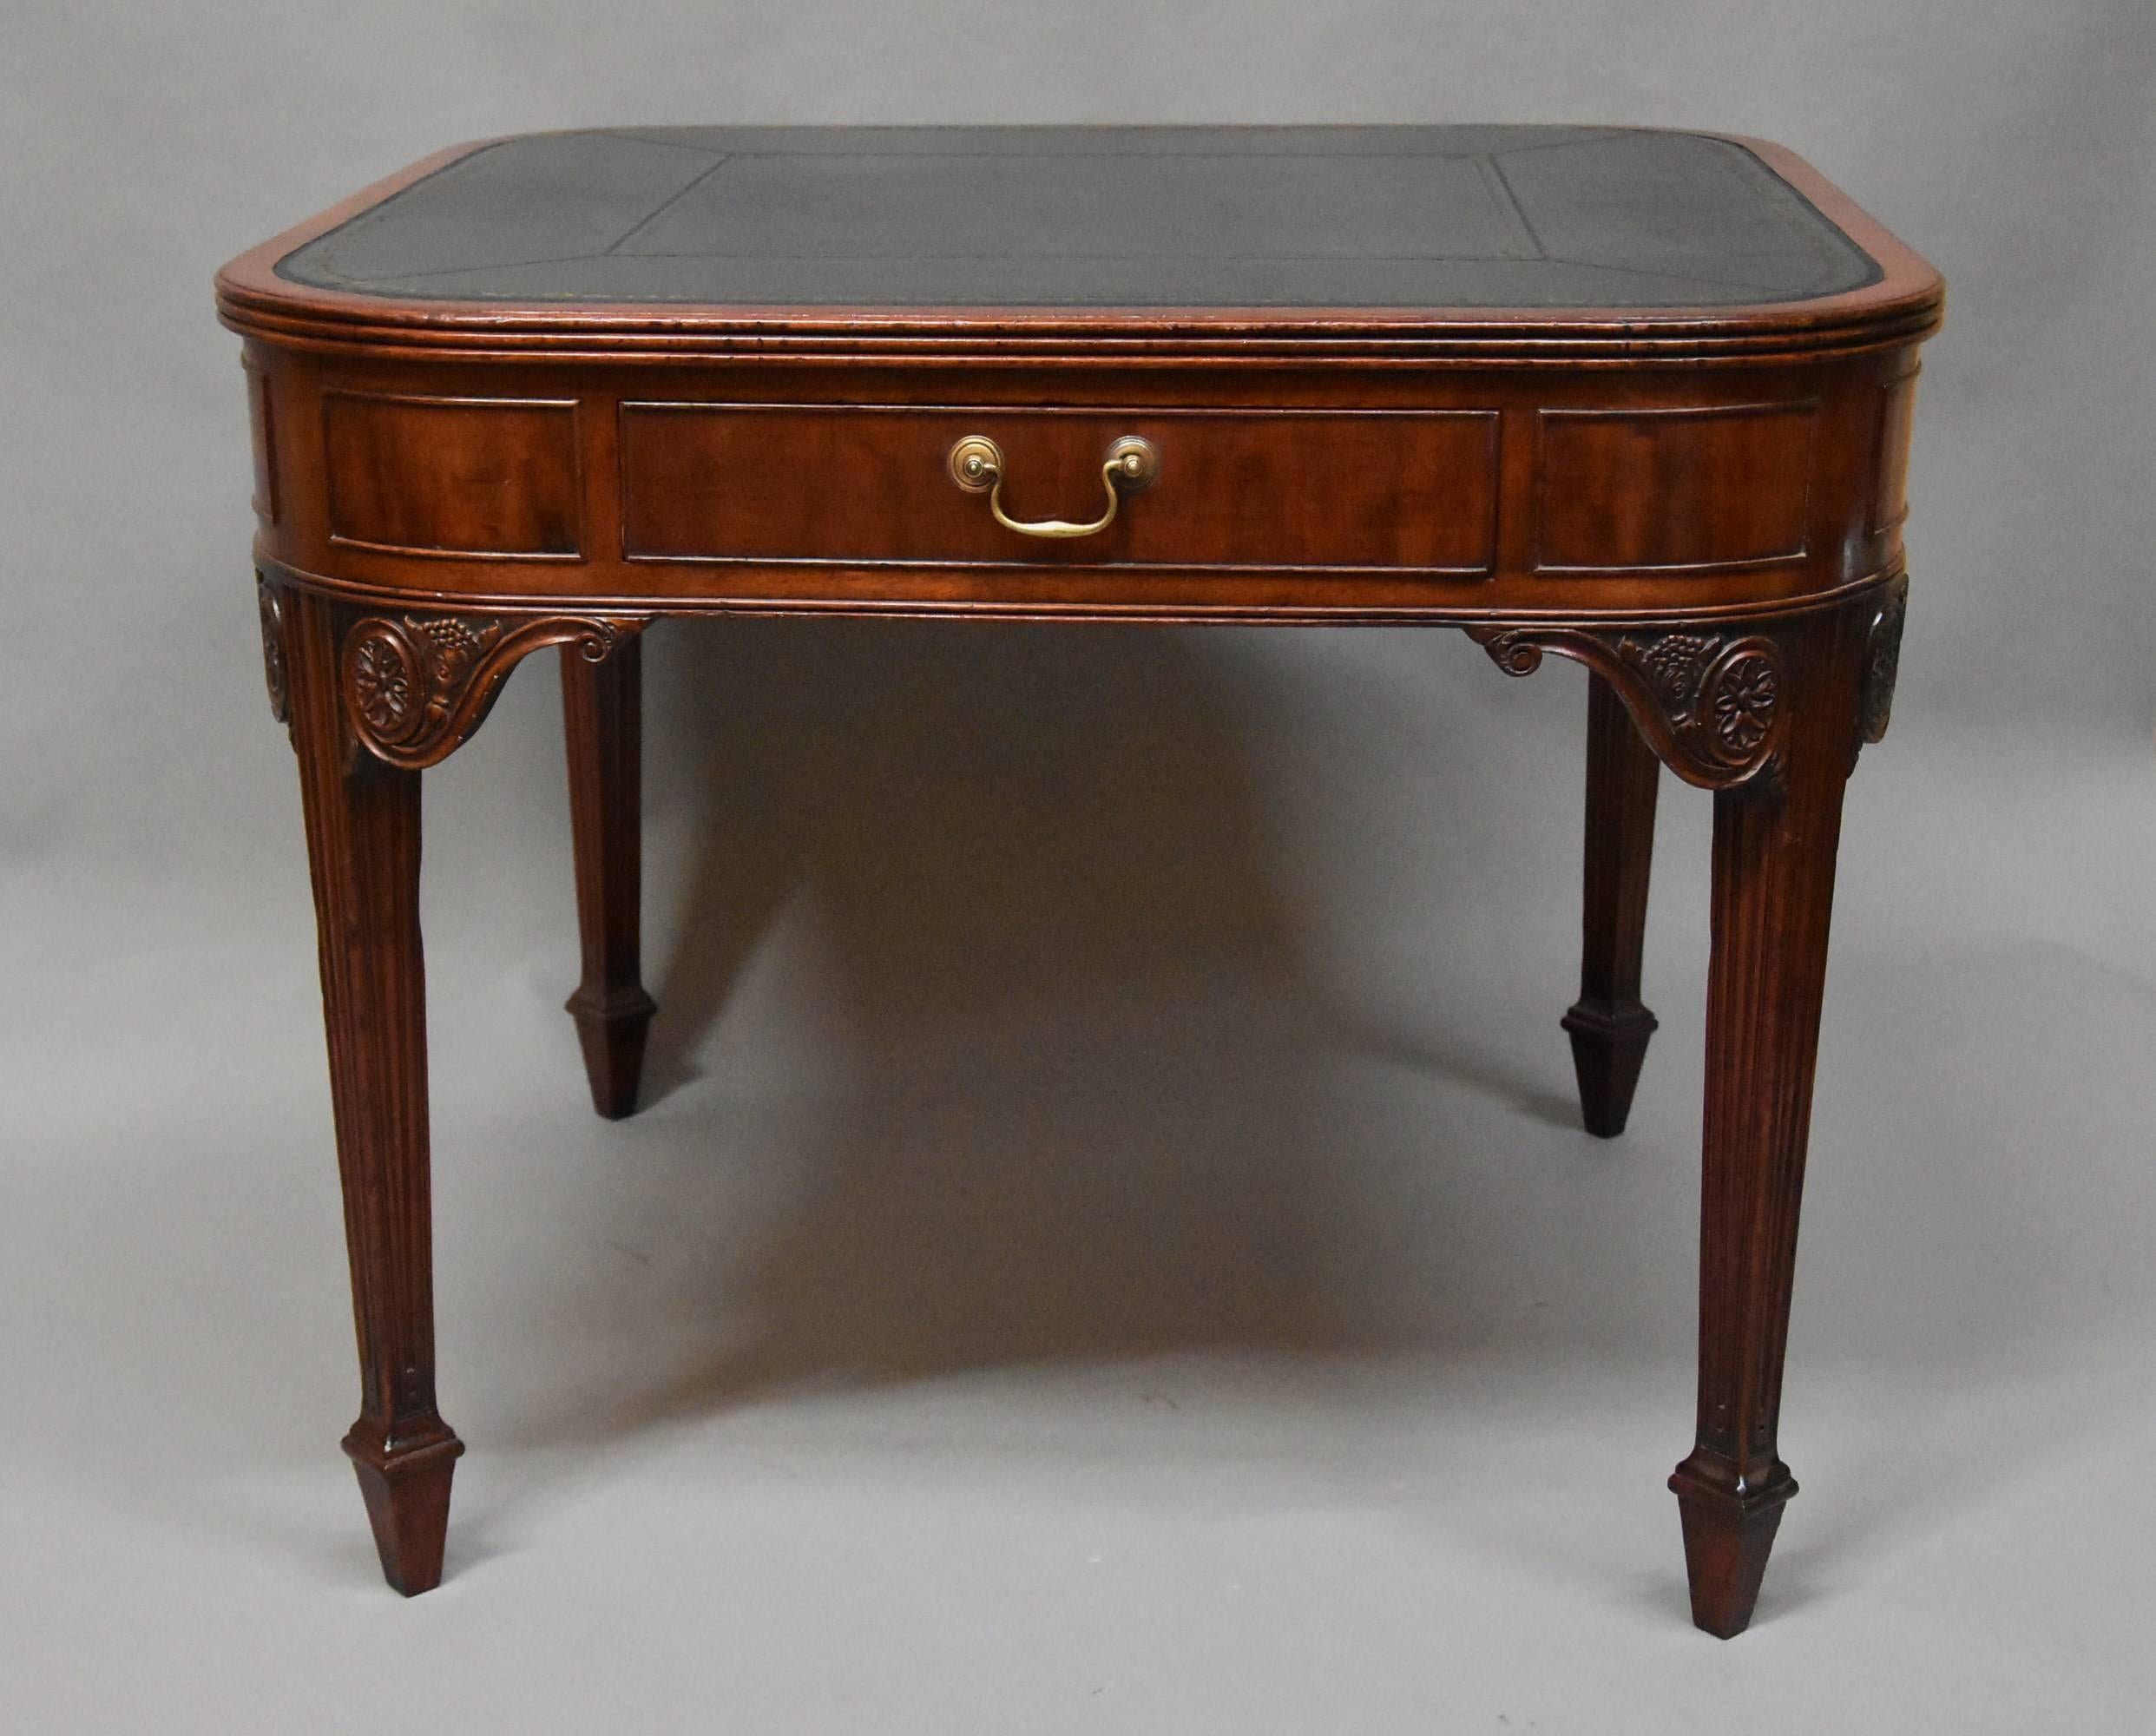 An English mid-late 19th century writing table of unusual square form with rounded corners with French influences to the design.

The table consists of a recently re-leathered black leather top with blind and gilded tooling surrounded by a